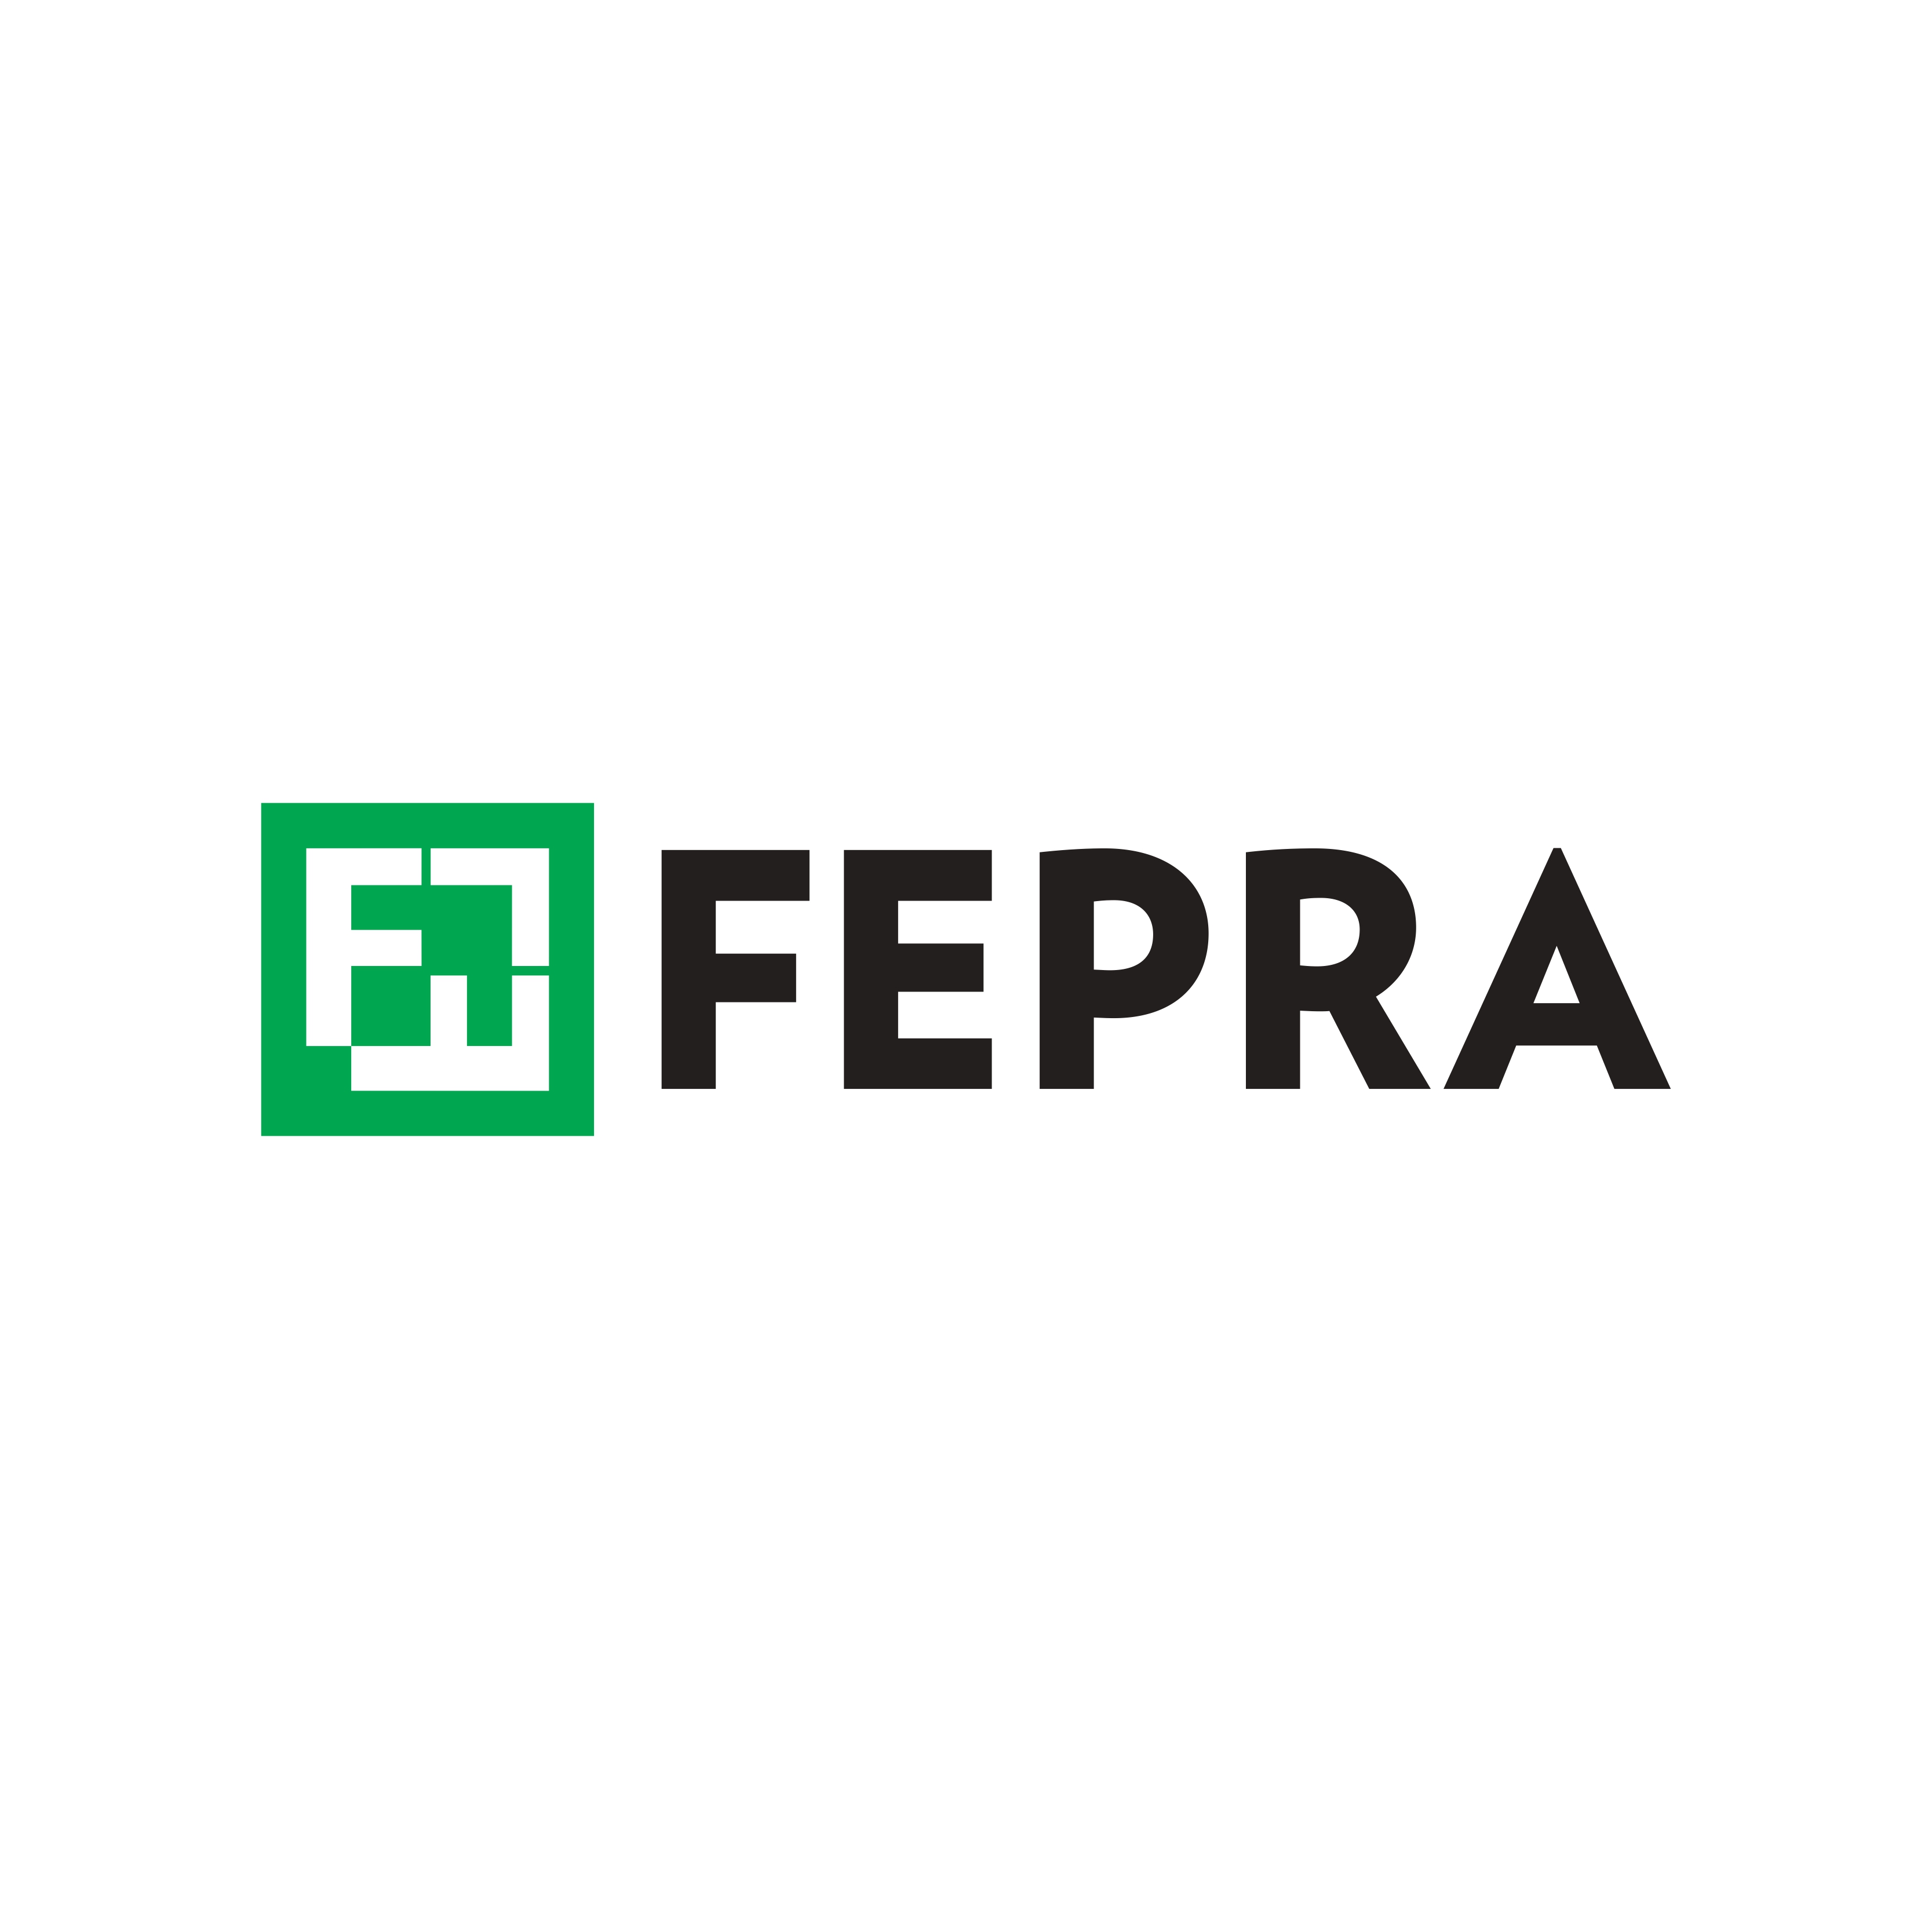 FEPRA is a group of companies established in 2013, in Romania, with a vision of creating a world where resources are shared in a responsible manner.